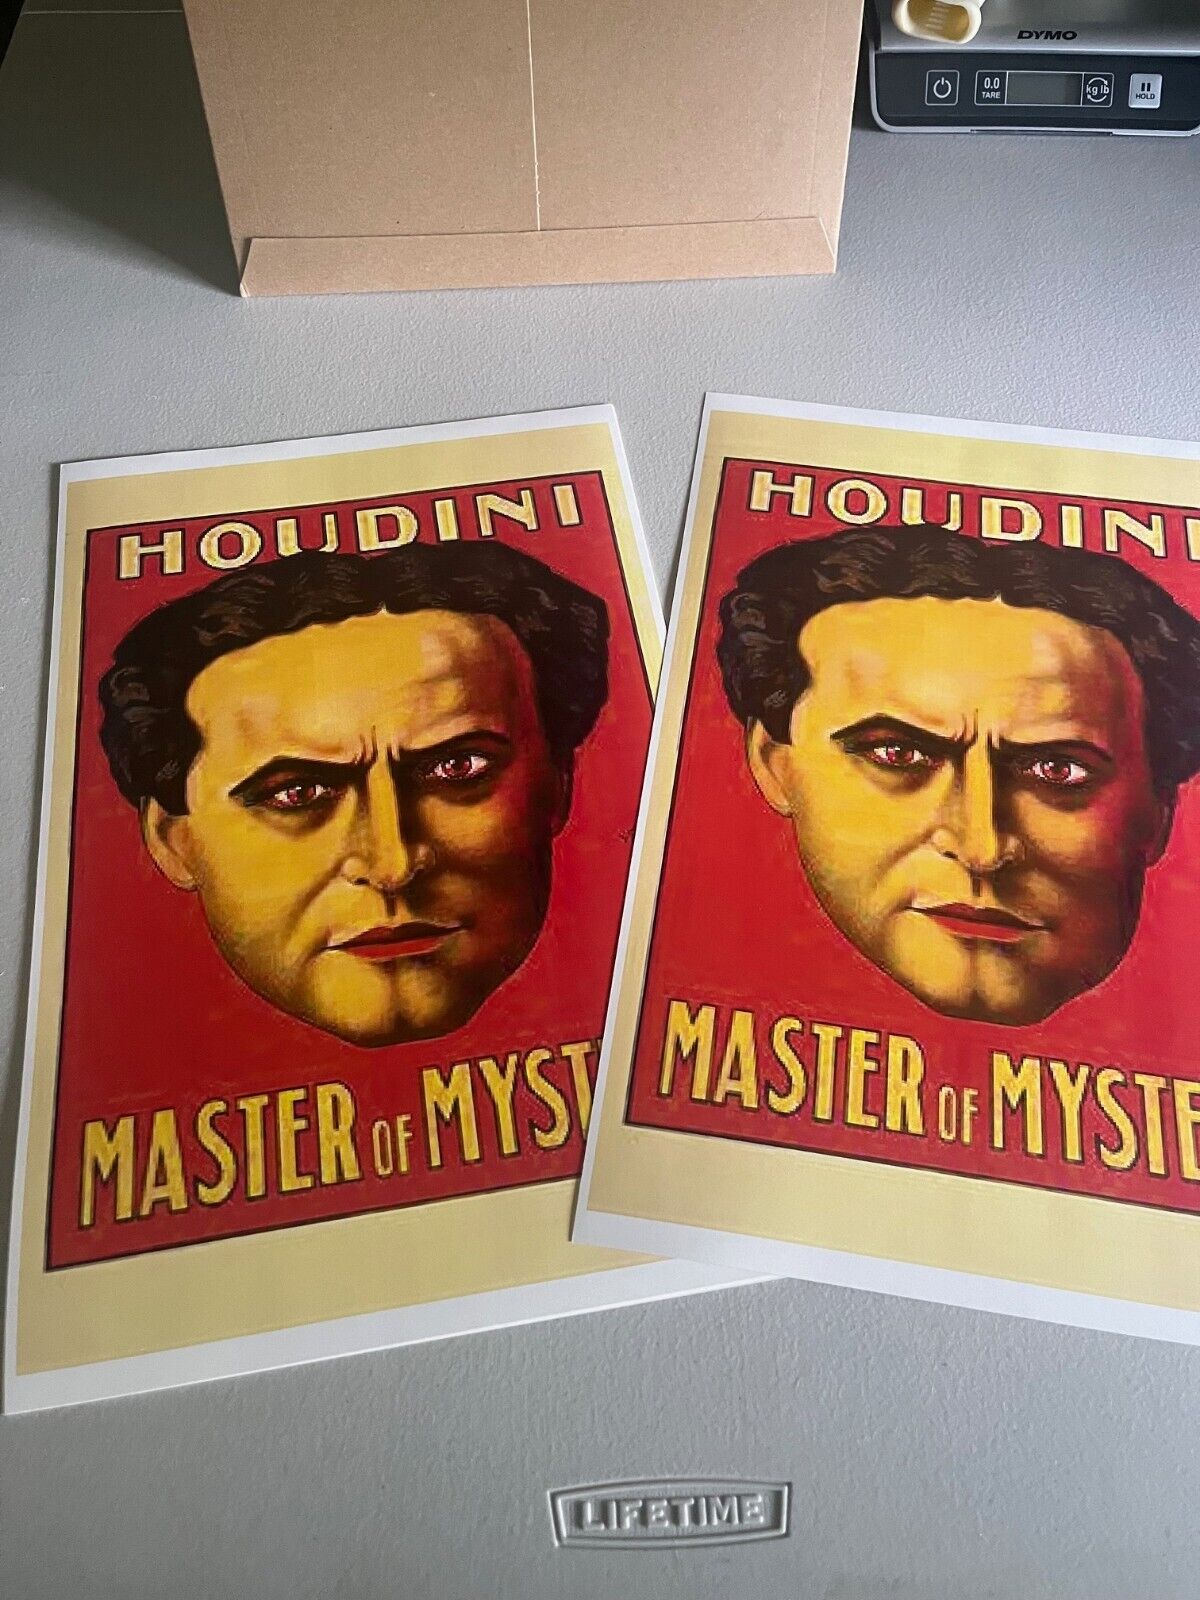 Harry Houdini, Master of Mystery, 11 x 17 Reprint Poster, Rare Collectible